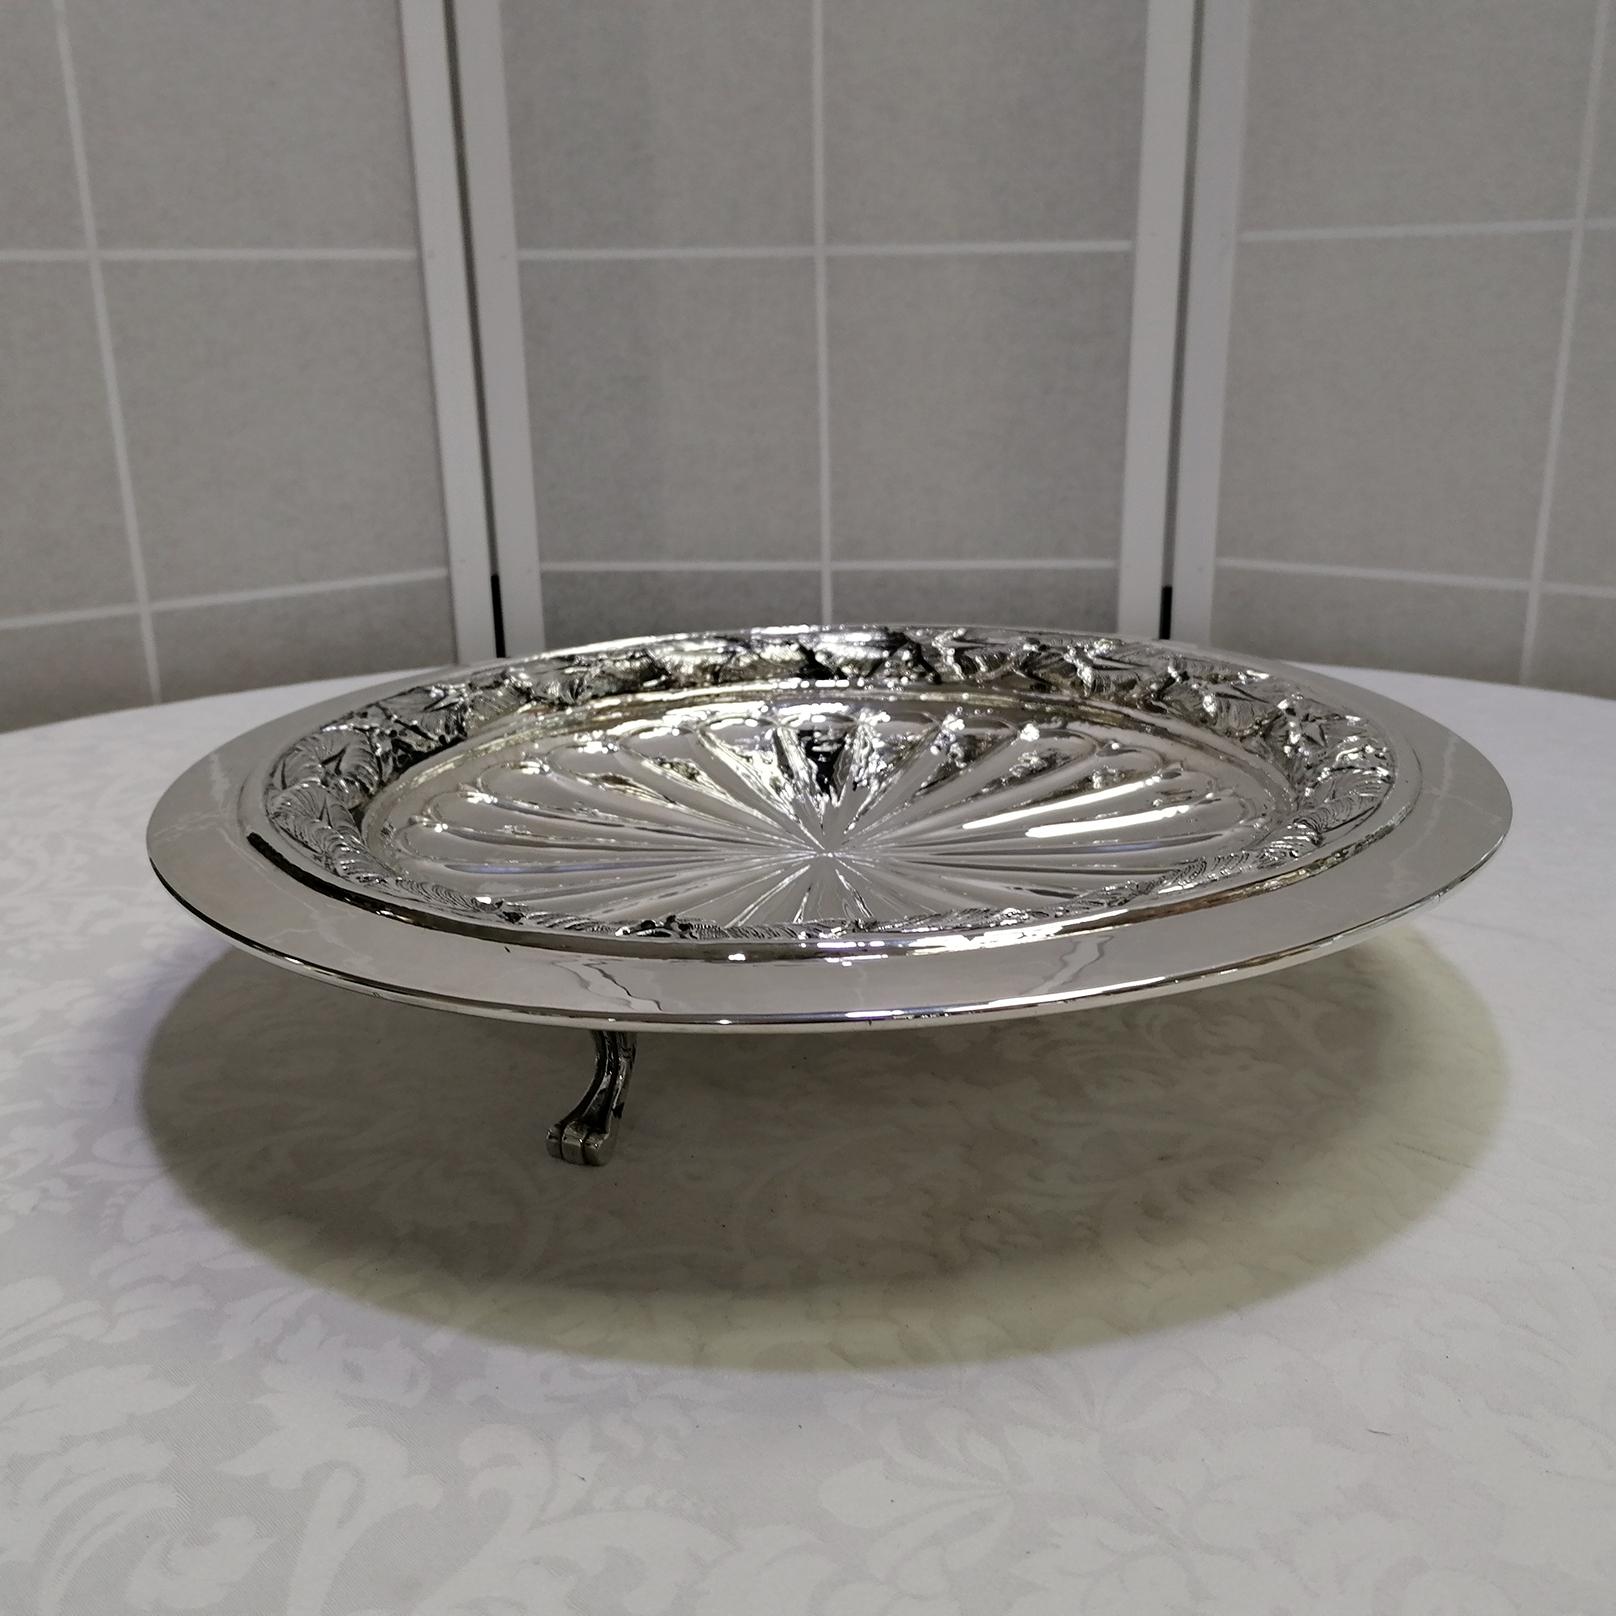 Large round centerpiece in sterling silver.
The centerpiece plate was made in the Empire style, without using borders but embossing and chiseling the ancanthus leaves inside the external band.
The outermost part of the centerpiece has been left